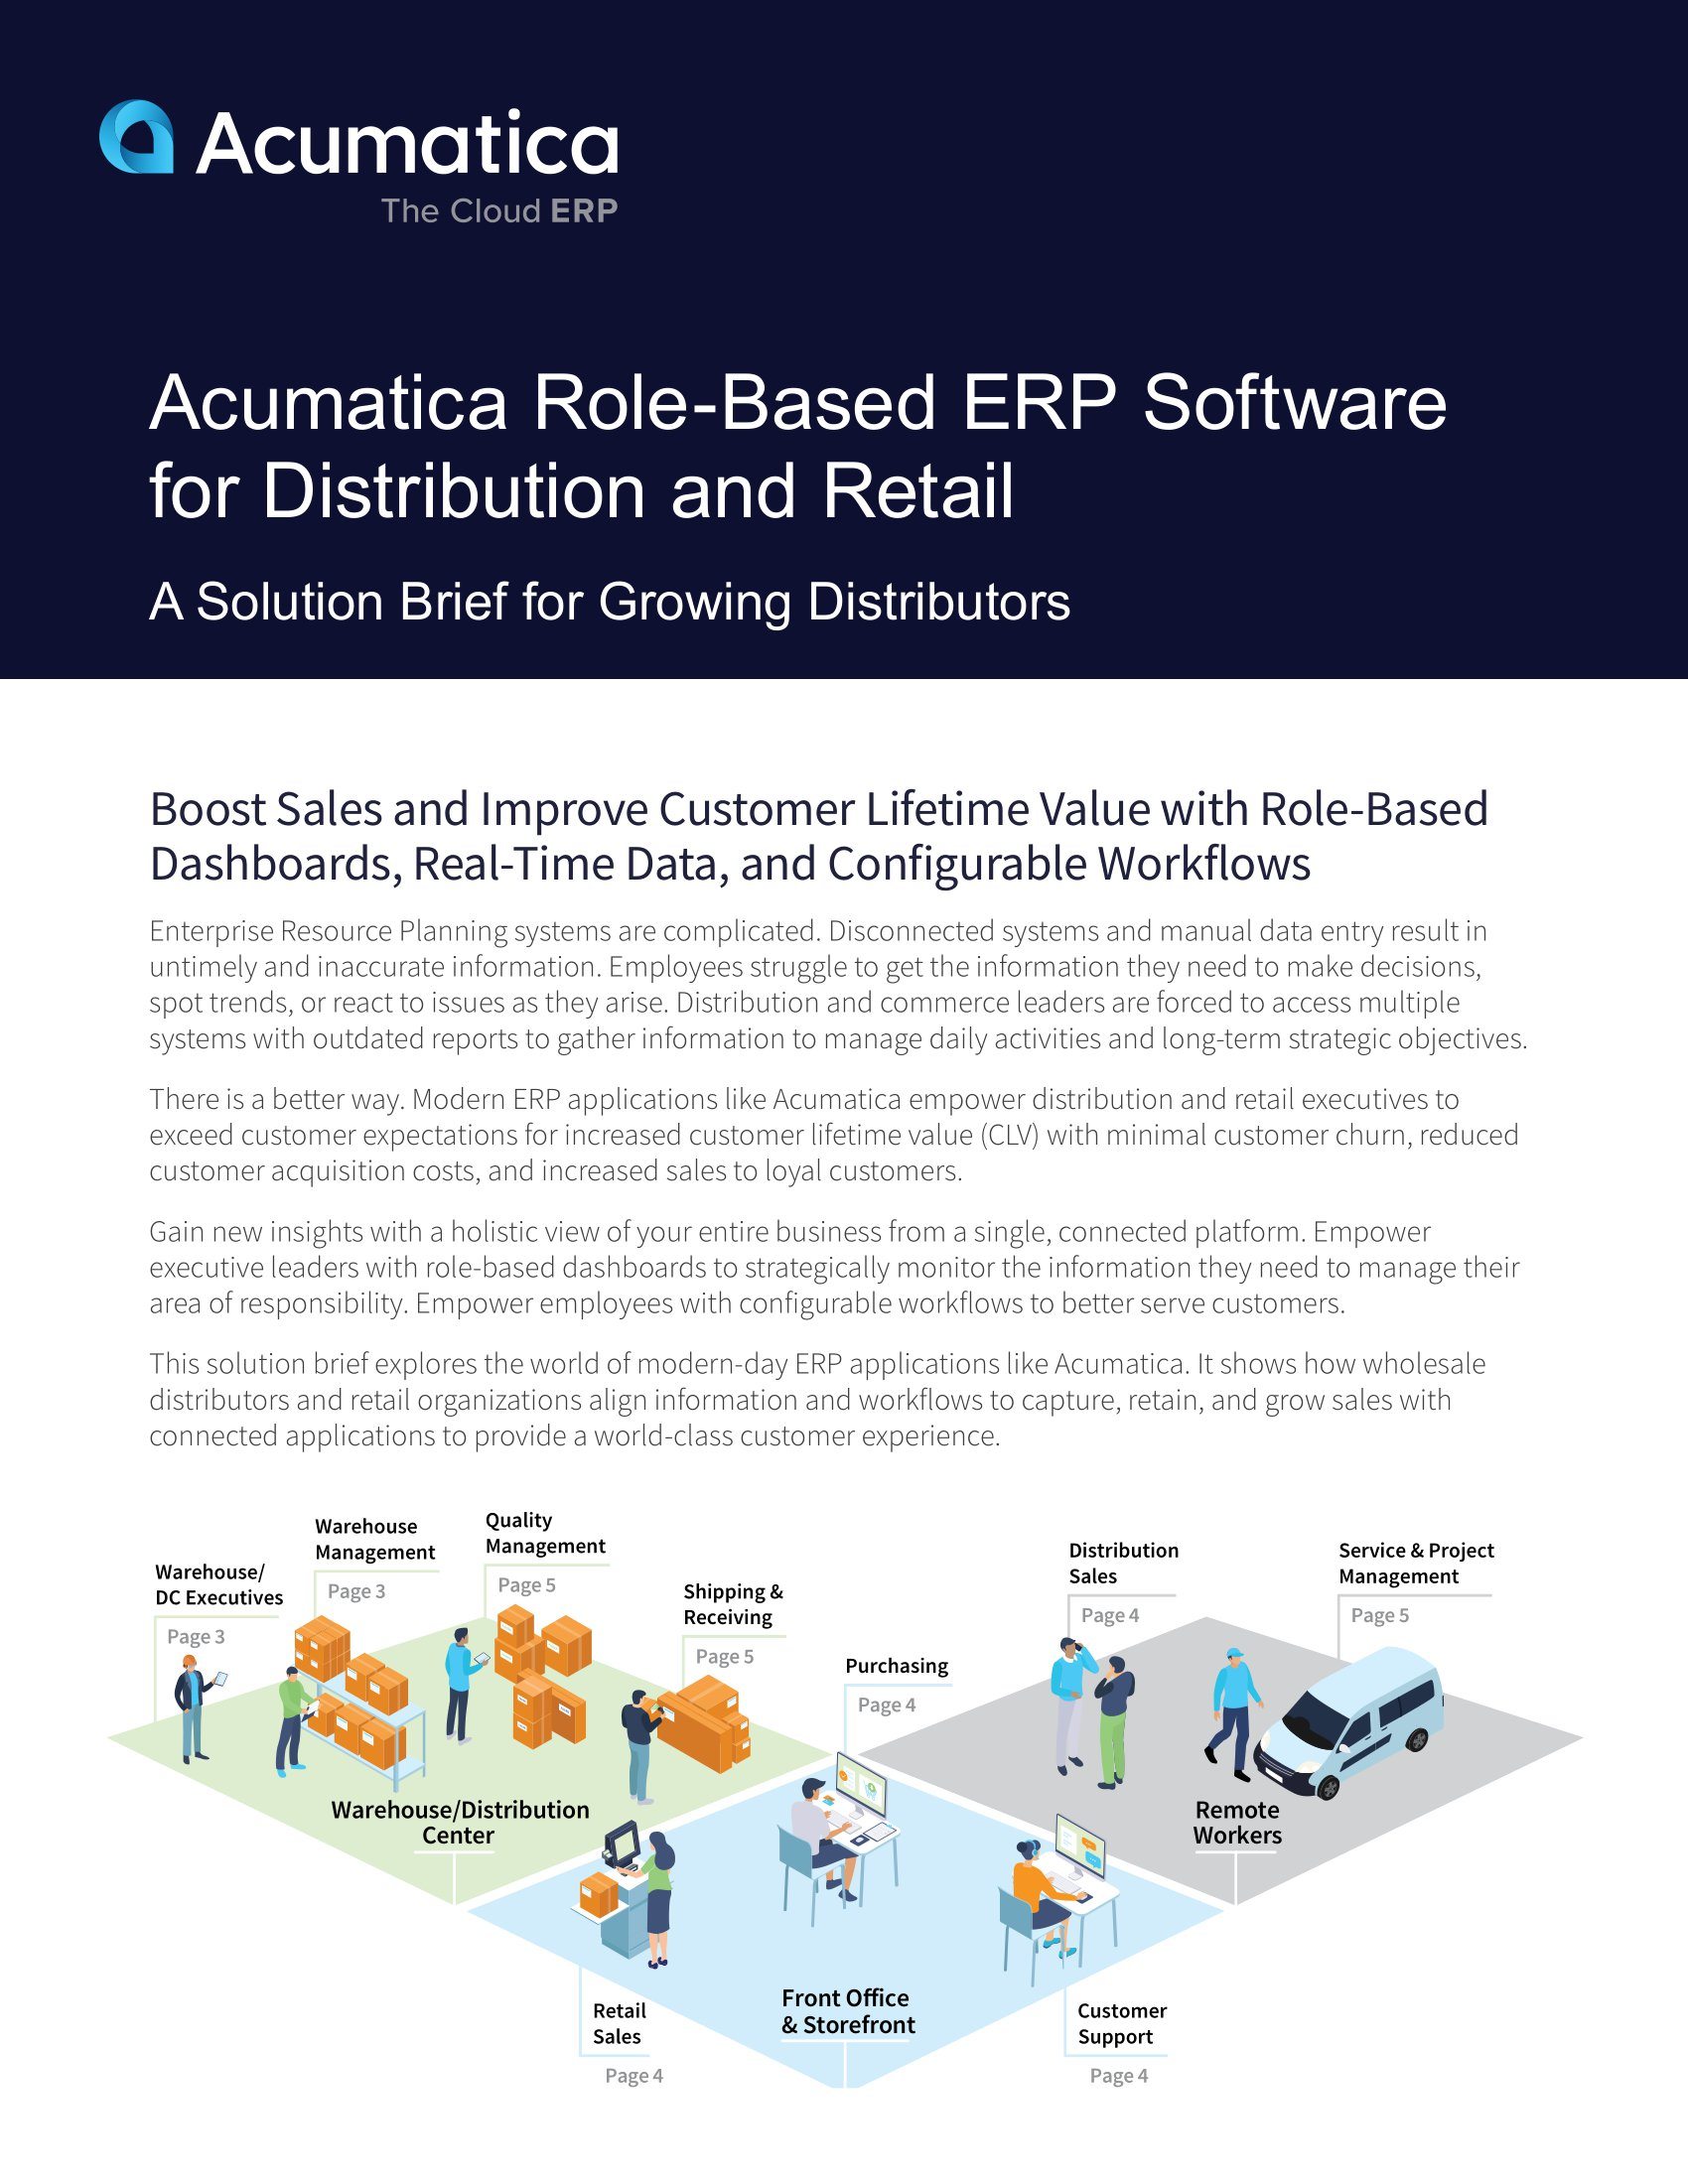 Find the Best ERP System for Distribution and Retail-Commerce Organizations